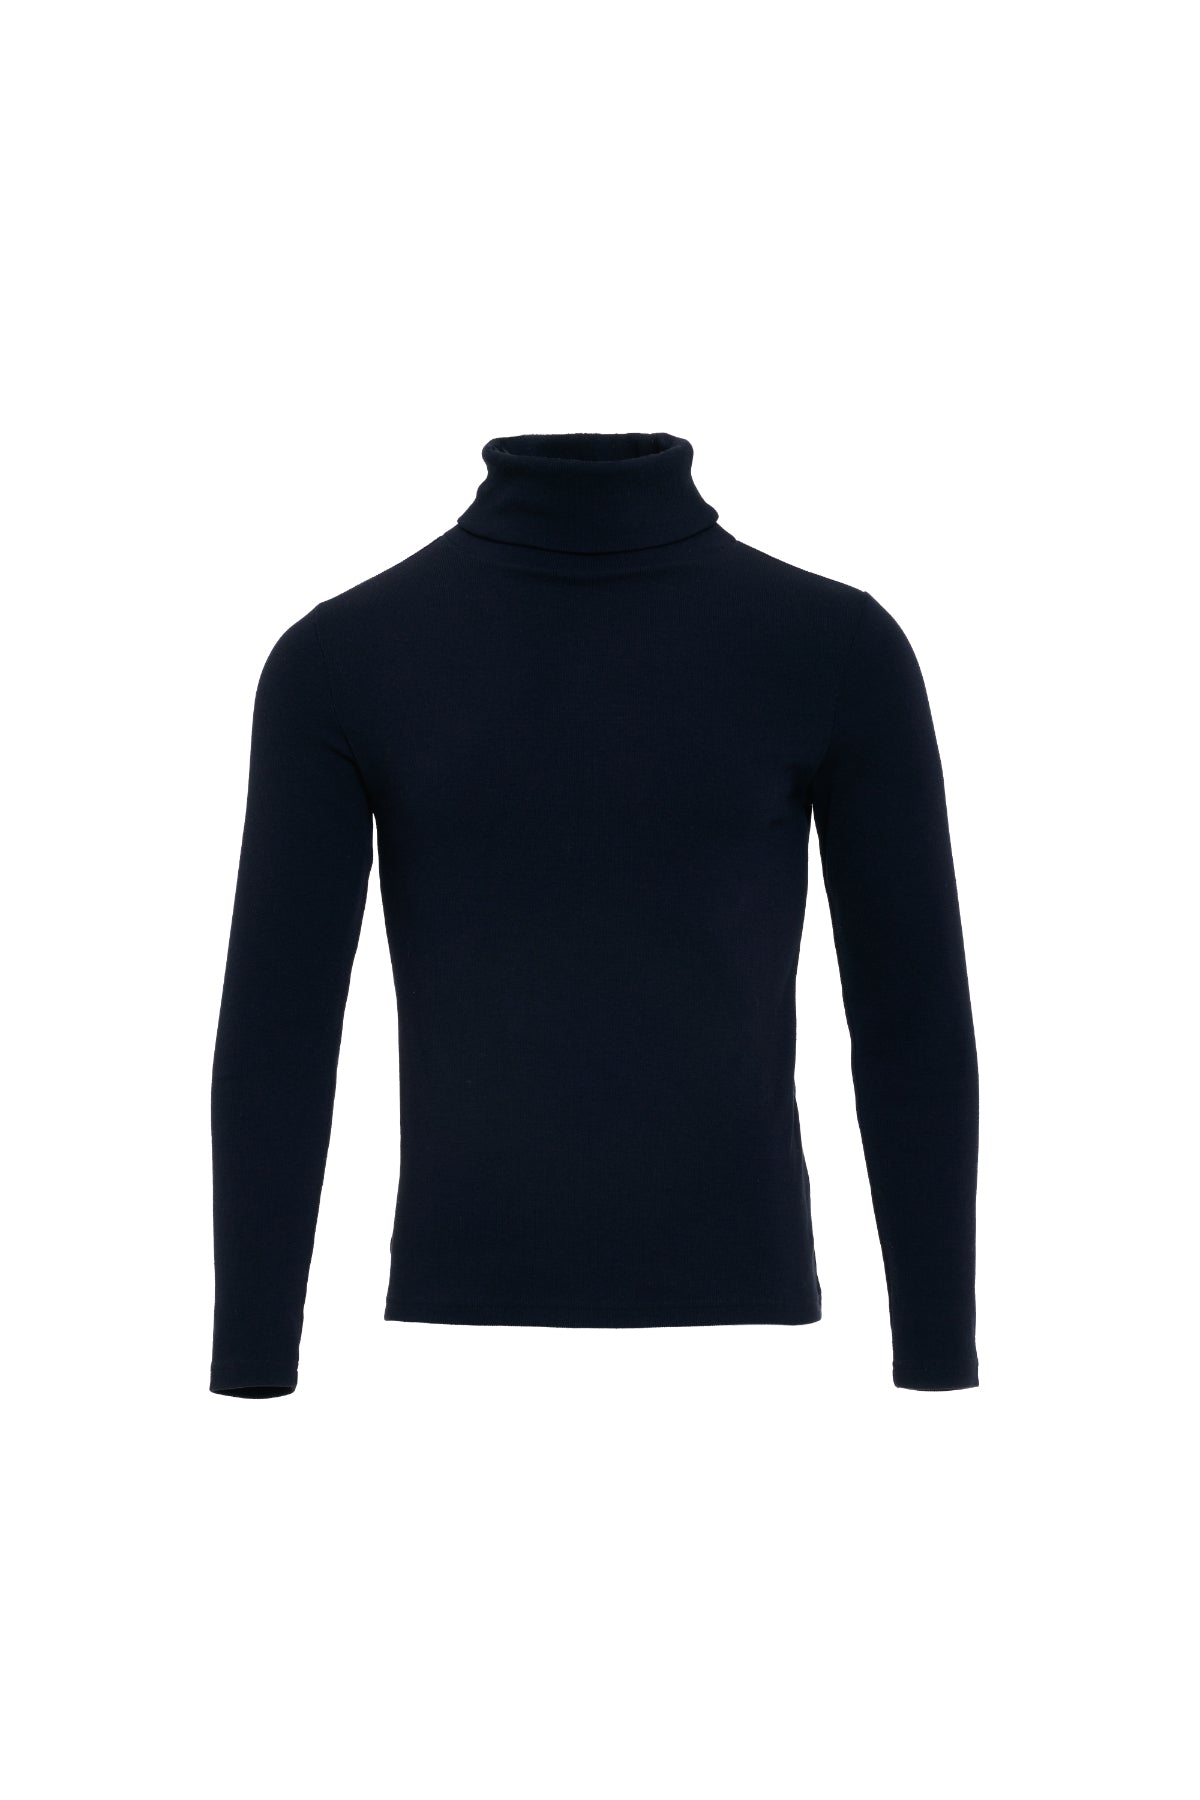 BLACK RECYCLED POLYESTER ROLL NECK KNIT